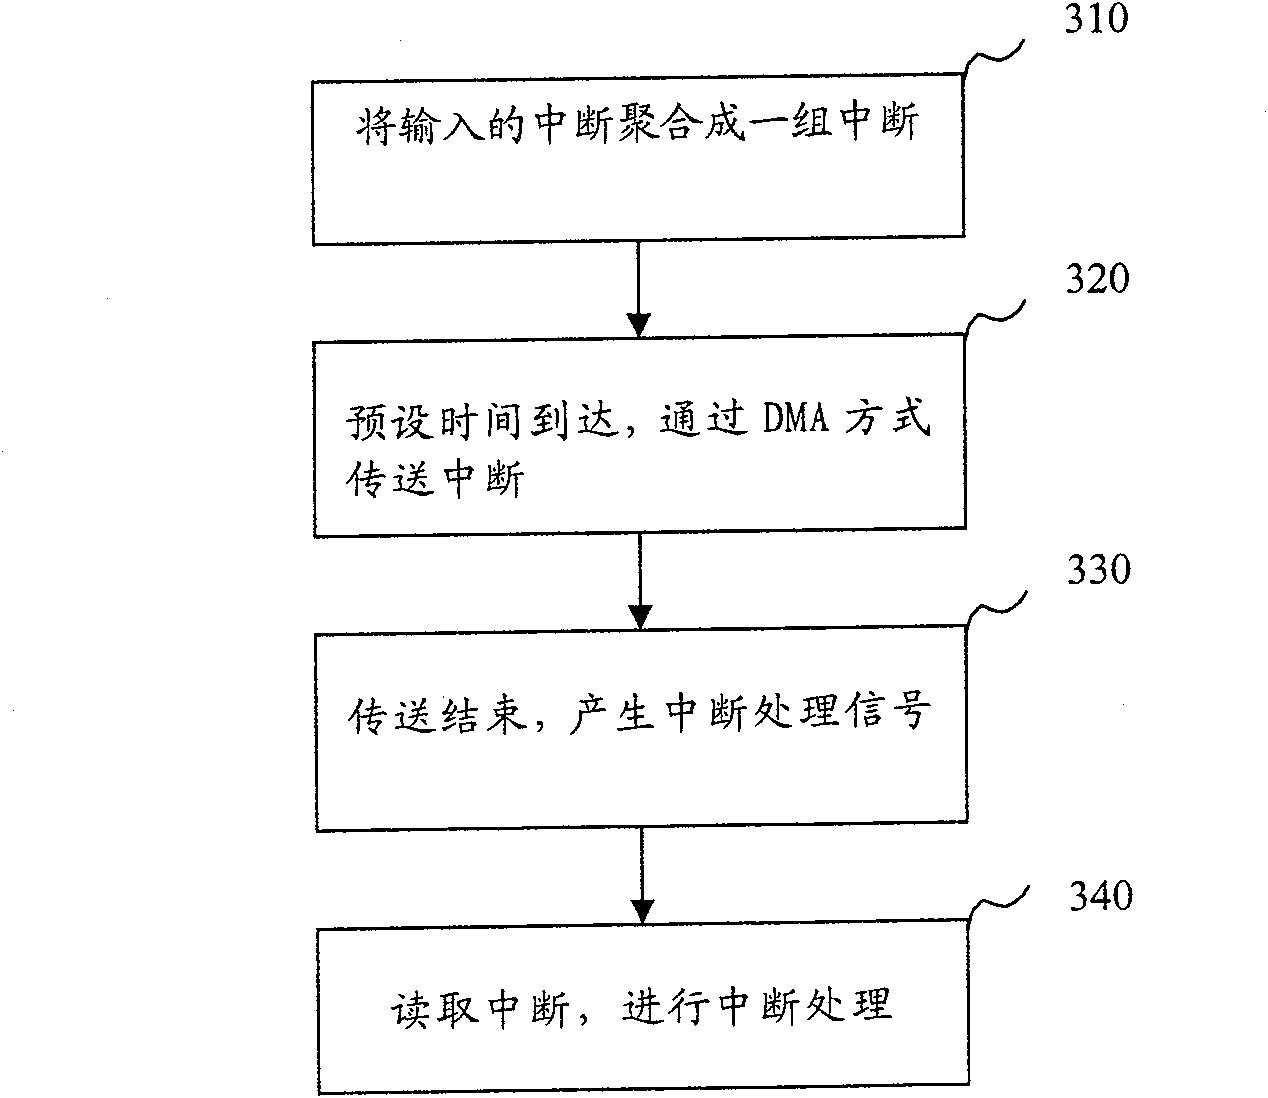 Interrupt processing method and device